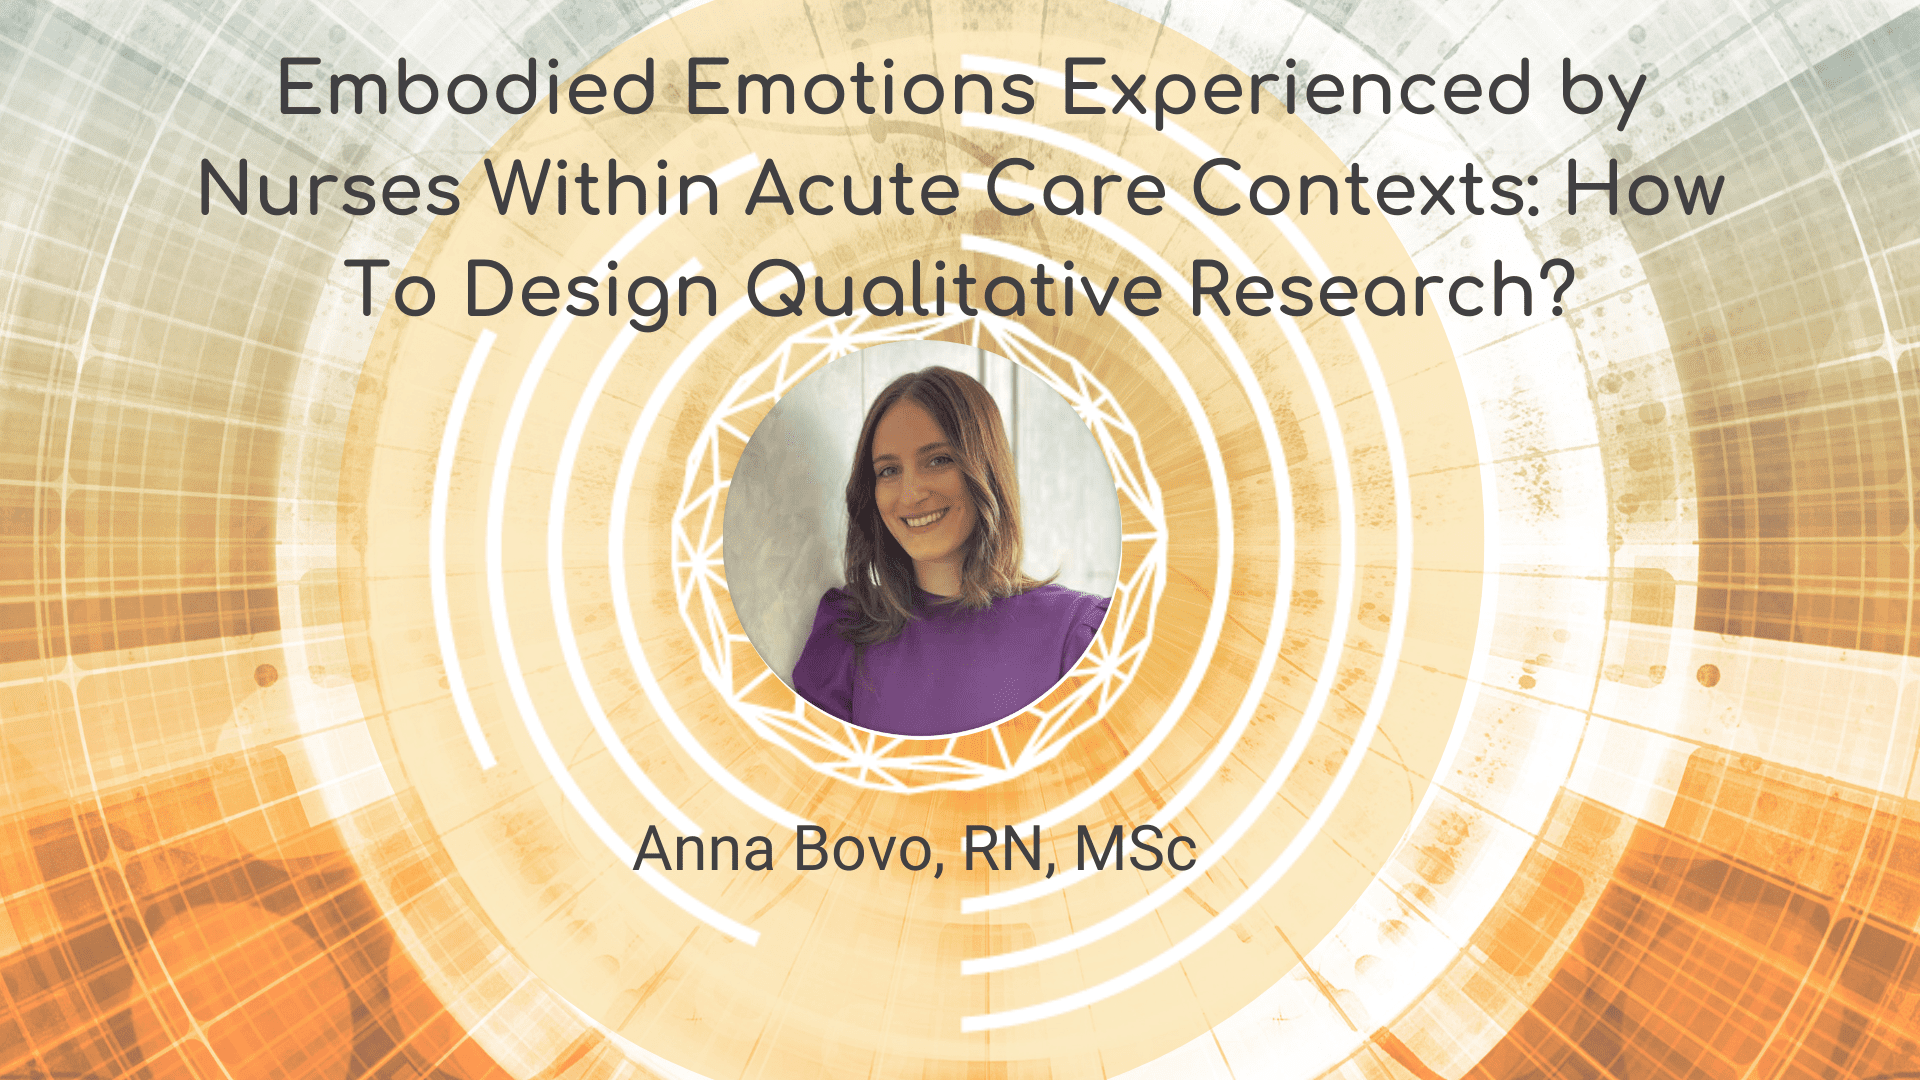 Embodied Emotions Experienced by Nurses Within Acute Care Contexts: How to Design Qualitative Research – Anna Bovo, RN, MSc